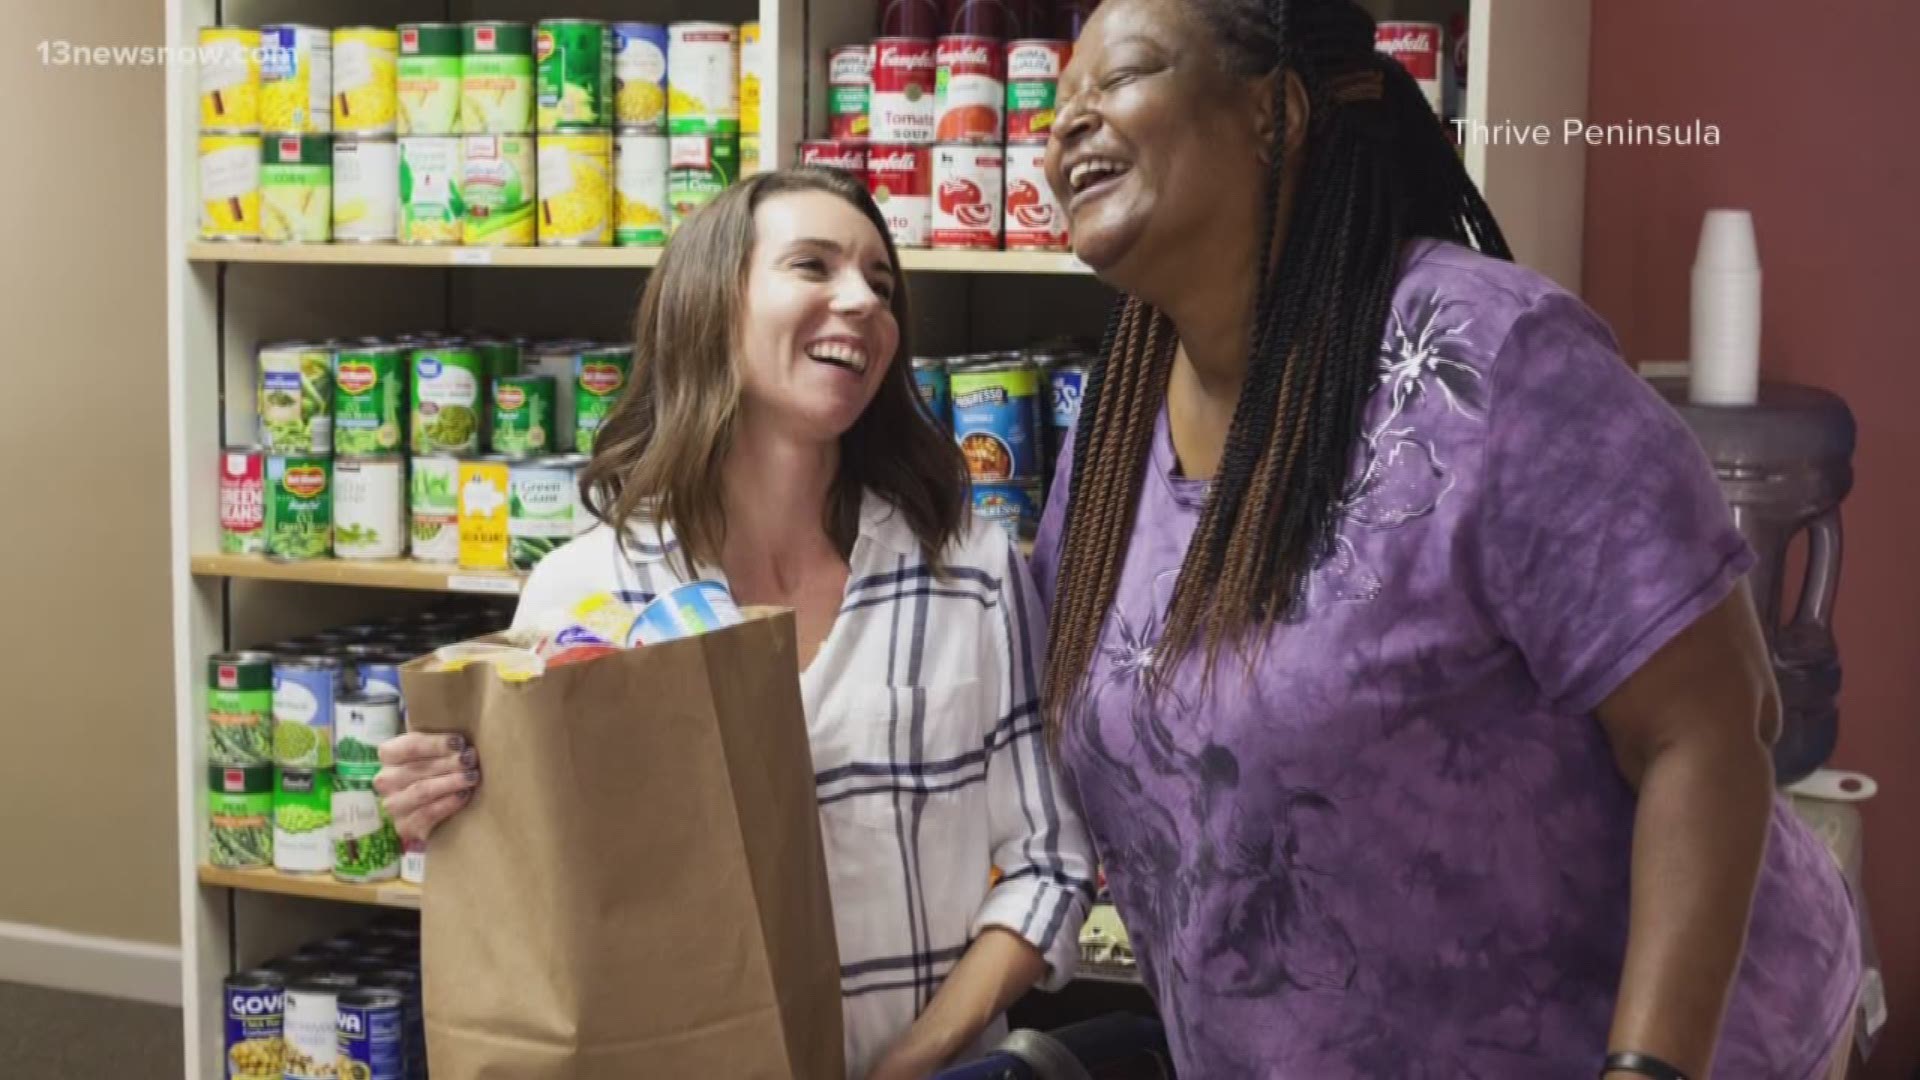 Some of the hardest hit during the COVID-19 pandemic are those dealing with financial instability and food insecurity. THRIVE Peninsula is working to help them.